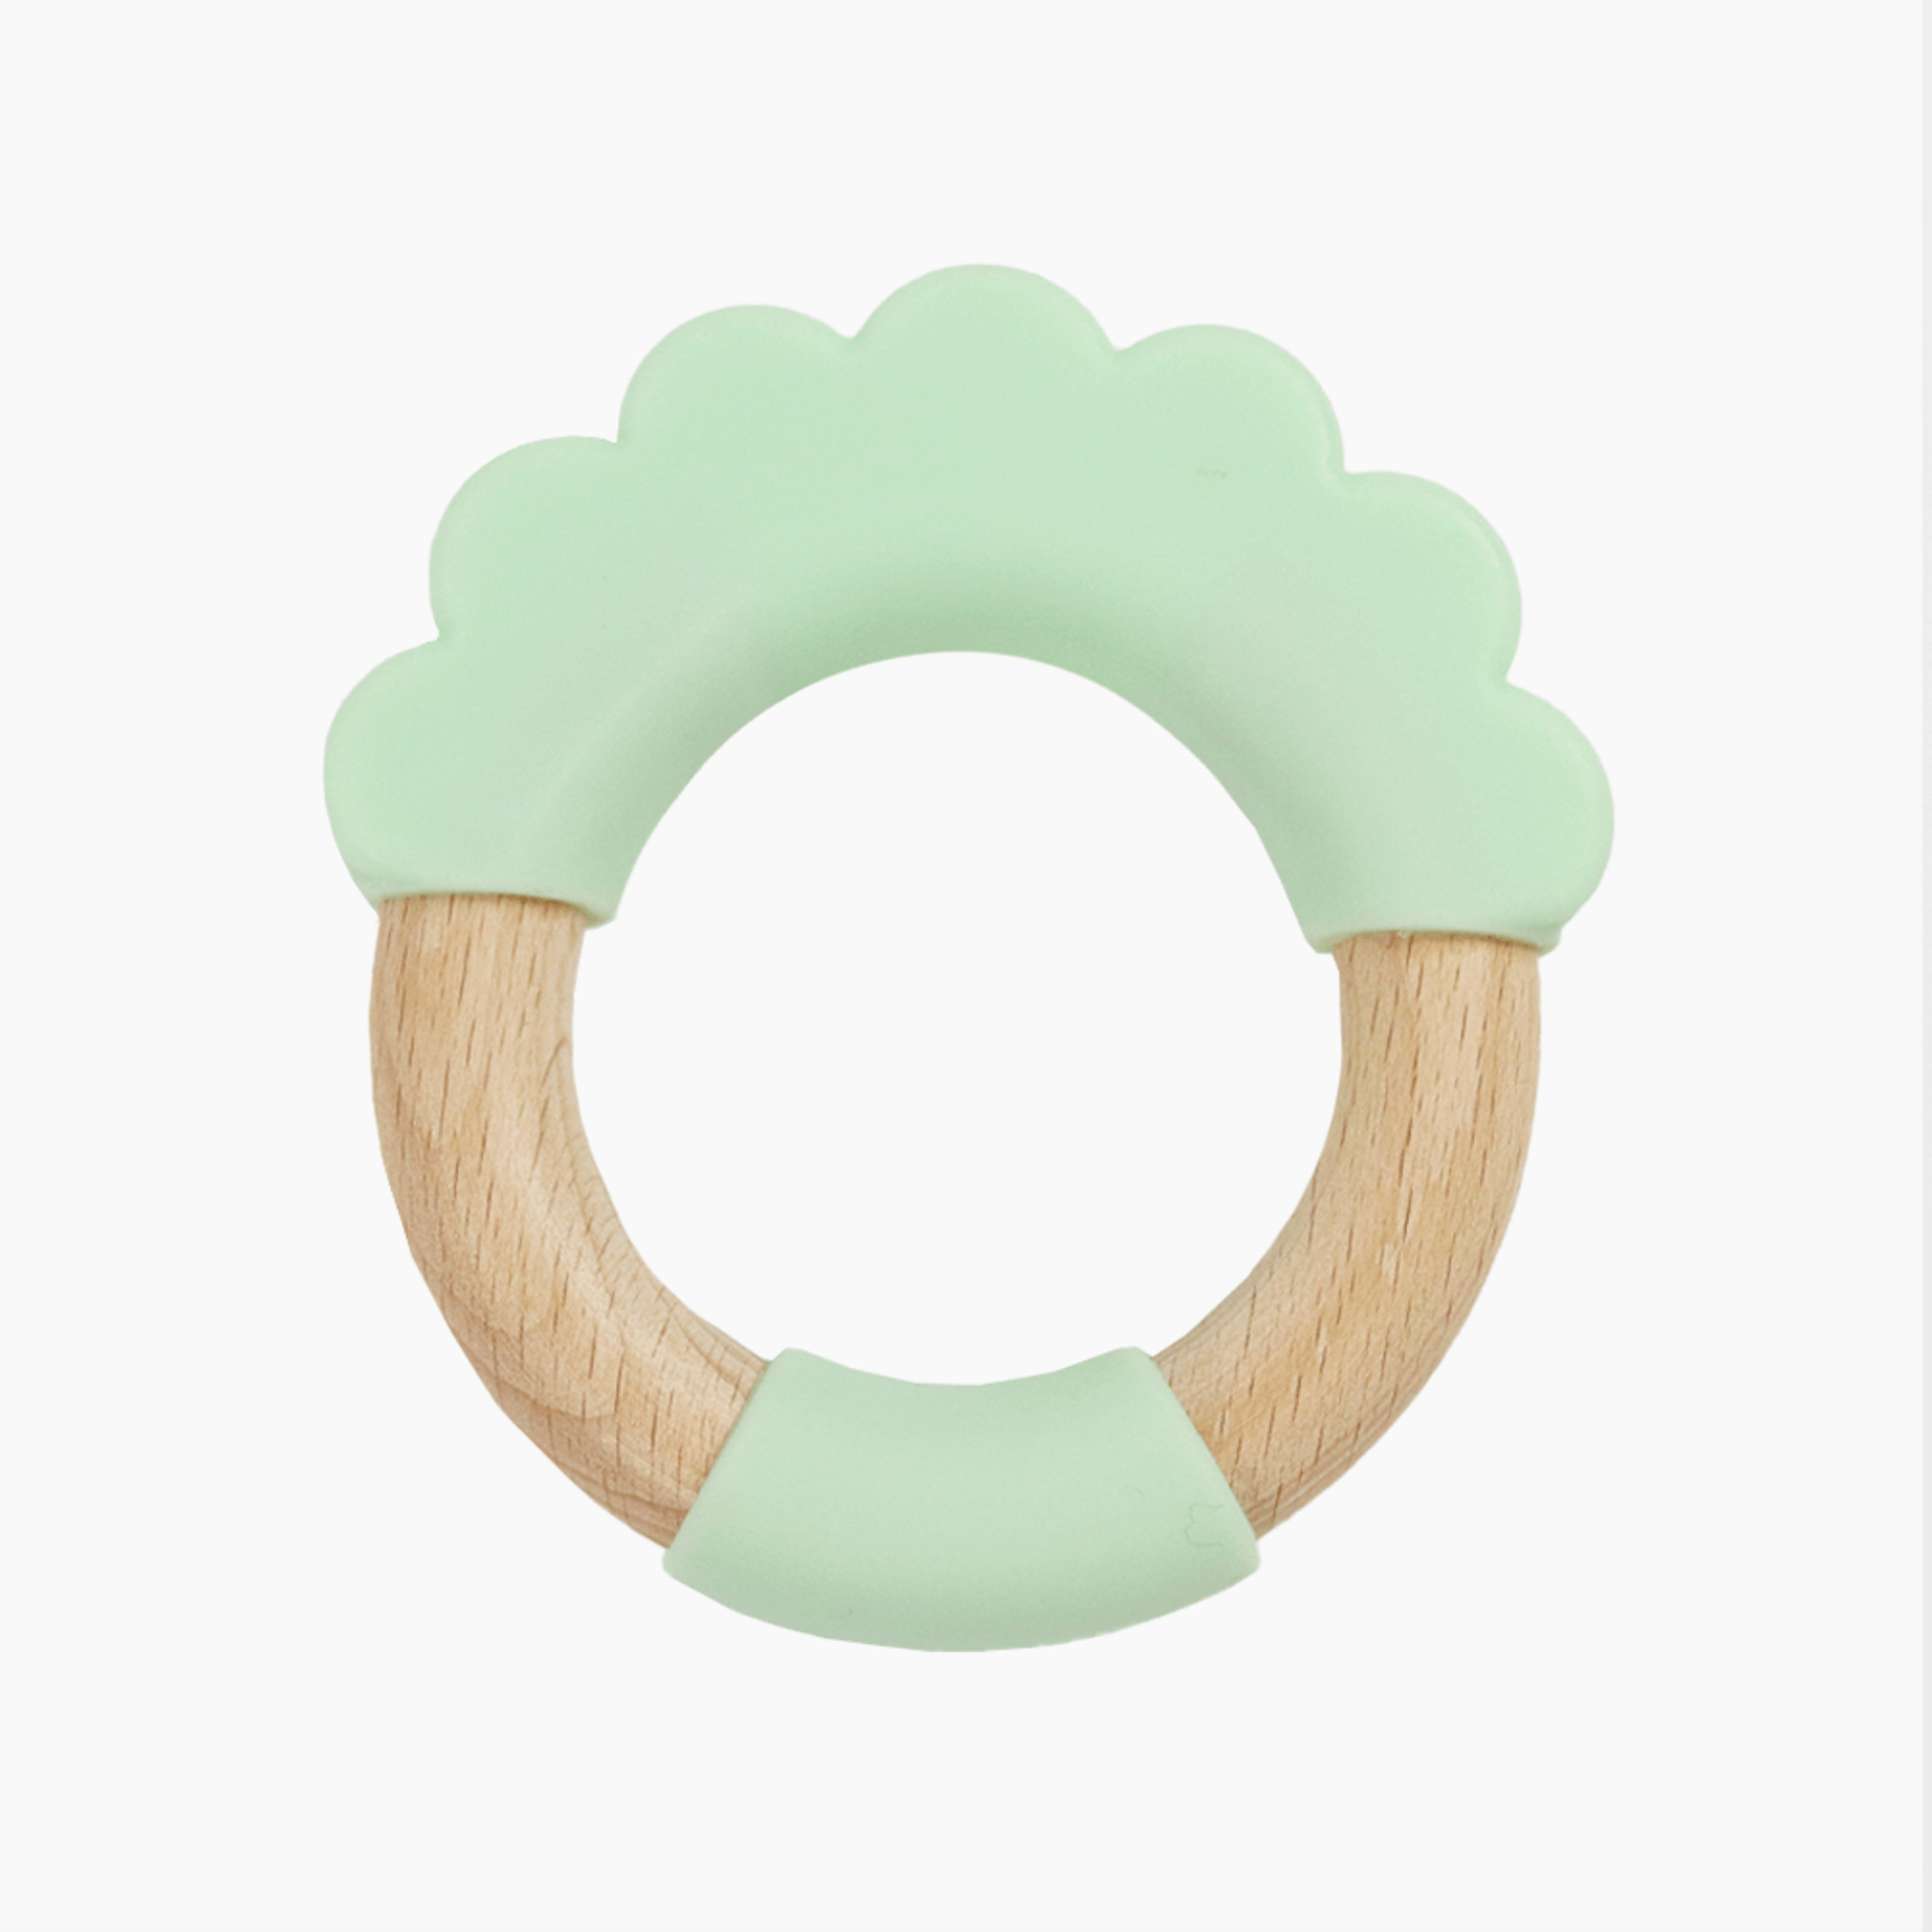 Mint Lion Circle Lion Head Teether Silicone + Wood Teether